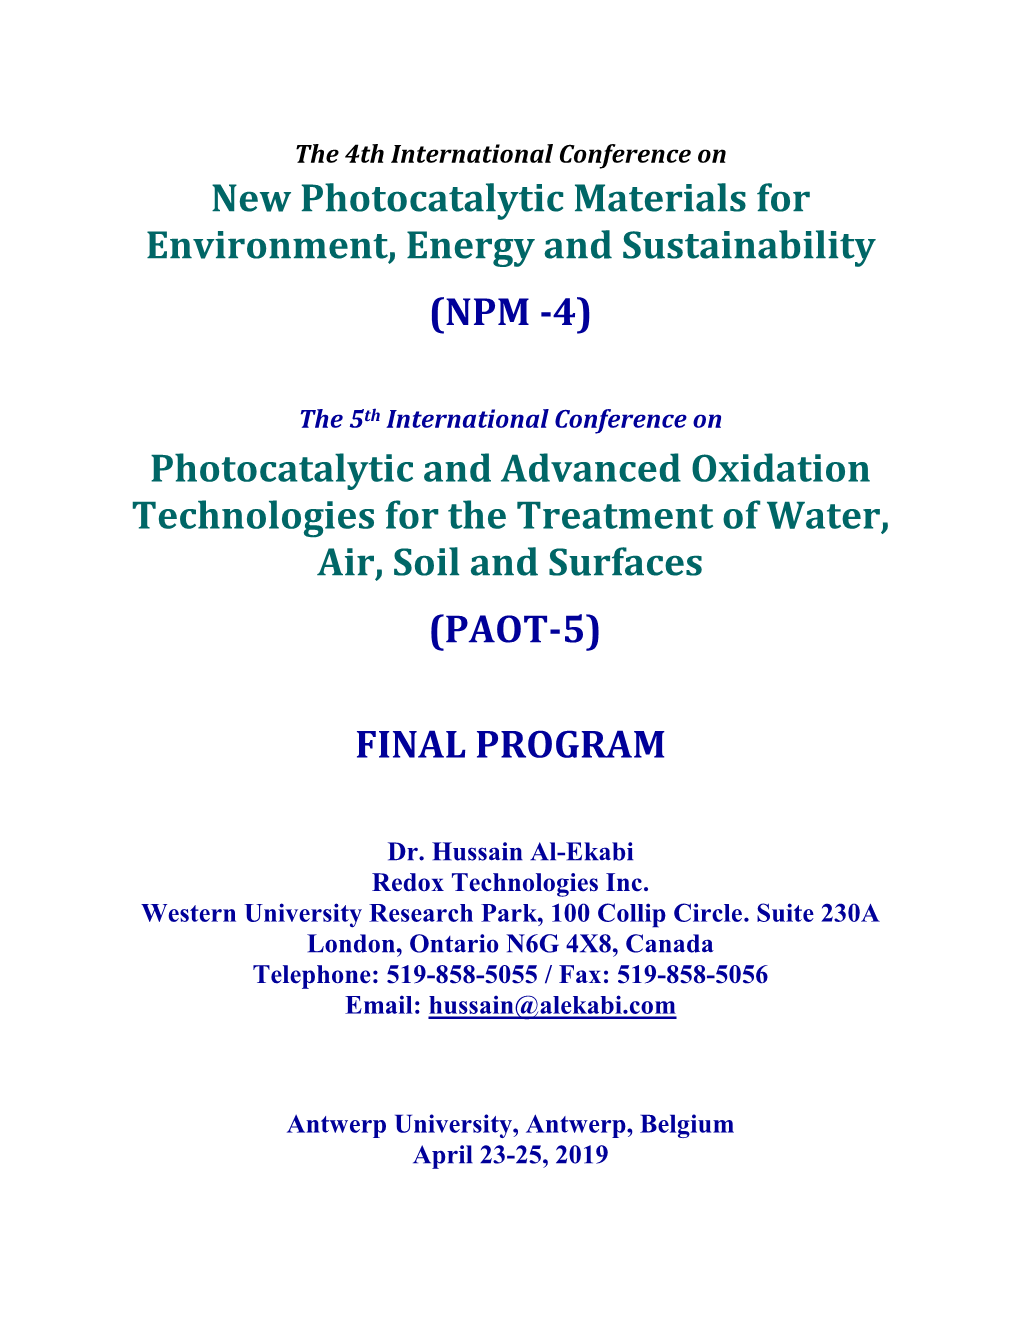 New Photocatalytic Materials for Environment, Energy and Sustainability (NPM -4)